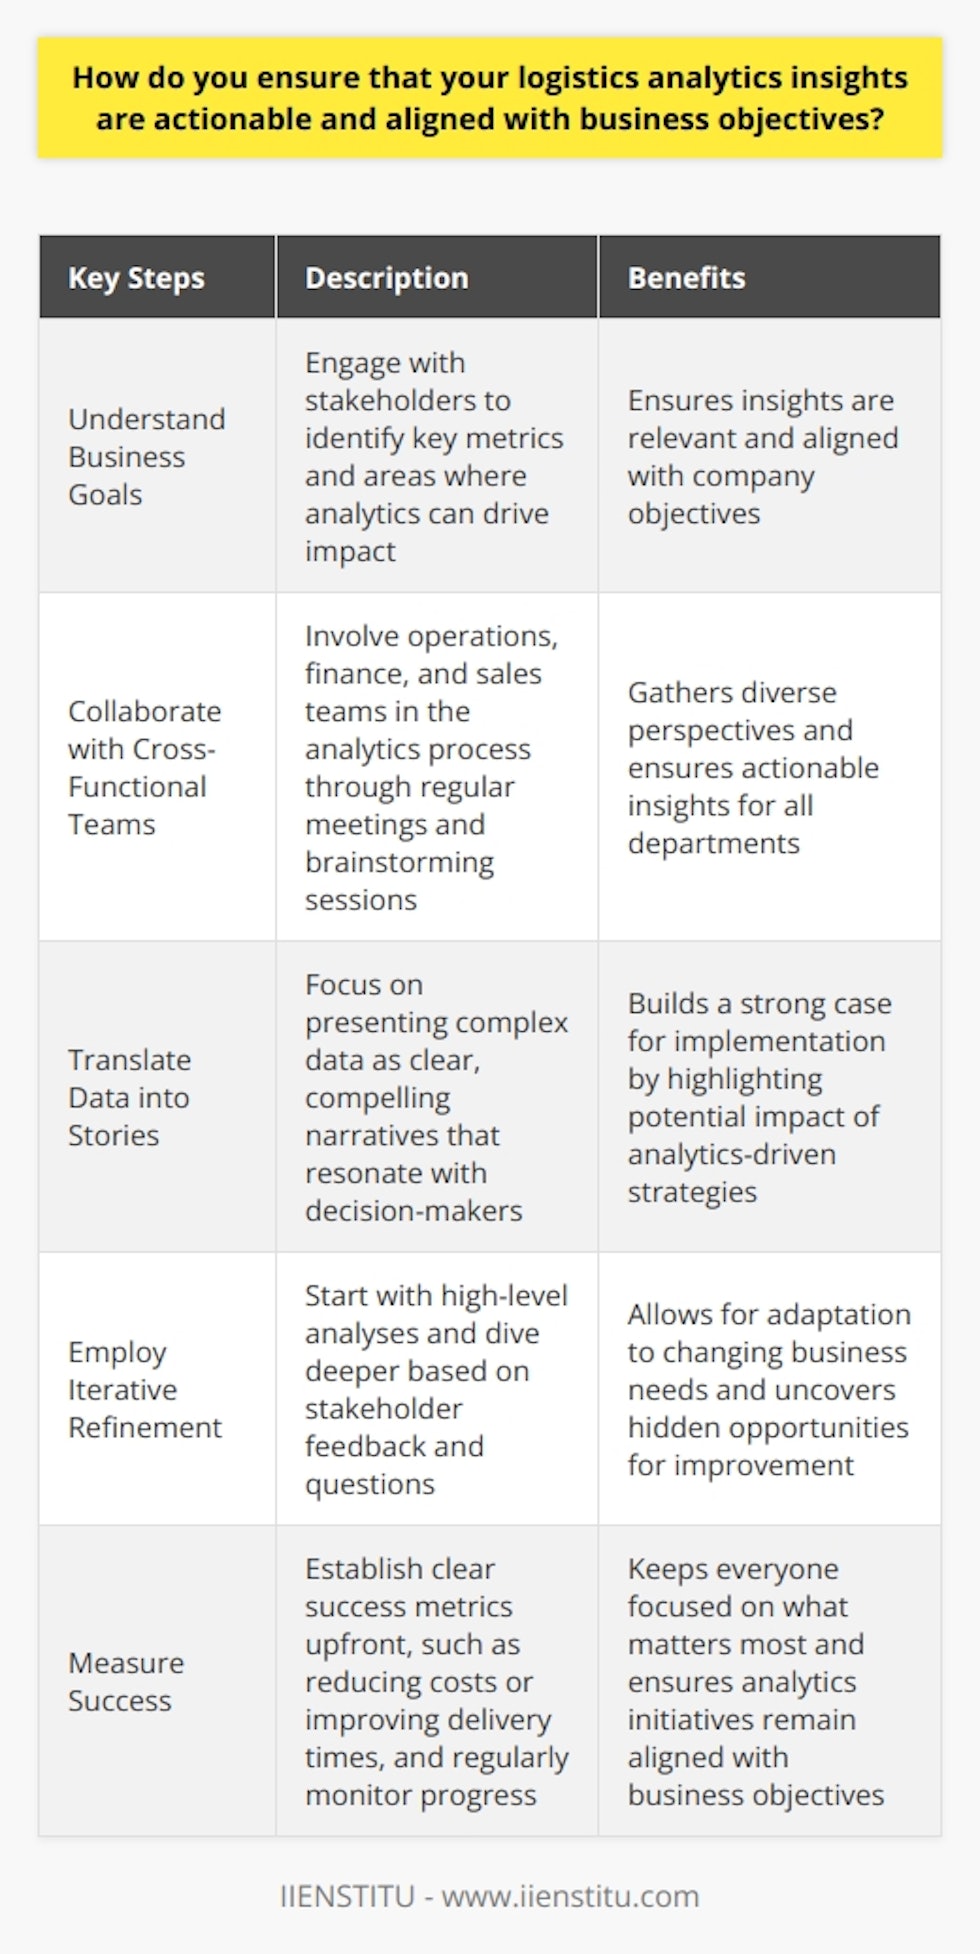 To ensure that logistics analytics insights are actionable and aligned with business objectives, I follow a structured approach. First, I gain a deep understanding of the companys goals and challenges through discussions with stakeholders. This helps me identify the key metrics and areas where analytics can drive the most impact. Collaboration is Key I work closely with cross-functional teams, including operations, finance, and sales, to gather diverse perspectives. By involving them in the analytics process, I ensure that the insights are relevant and actionable for all departments. Regular meetings and brainstorming sessions help align everyone towards common objectives. Translating Data into Stories Numbers alone dont drive change; its the stories behind them that motivate action. I focus on translating complex data into clear, compelling narratives that resonate with decision-makers. By highlighting the potential impact of analytics-driven strategies, I build a strong case for implementation. Iterative Refinement Actionable insights often emerge through iterative refinement. I start with high-level analyses and then dive deeper based on feedback and questions from stakeholders. This agile approach allows me to adapt the analytics to changing business needs and uncover hidden opportunities for improvement. Measuring Success To ensure that analytics initiatives remain aligned with business objectives, I establish clear success metrics upfront. Whether its reducing costs, improving delivery times, or increasing customer satisfaction, having measurable goals keeps everyone focused on what matters most. I regularly monitor progress and adjust strategies as needed to maximize results. By following this approach, Ive successfully implemented analytics projects that have driven significant business value. For example, at my previous company, I led an initiative to optimize our warehouse operations using predictive analytics. By identifying inefficiencies and recommending data-driven solutions, we reduced inventory costs by 15% while improving order fulfillment rates. Its experiences like these that fuel my passion for turning data into actionable insights that move the business forward.